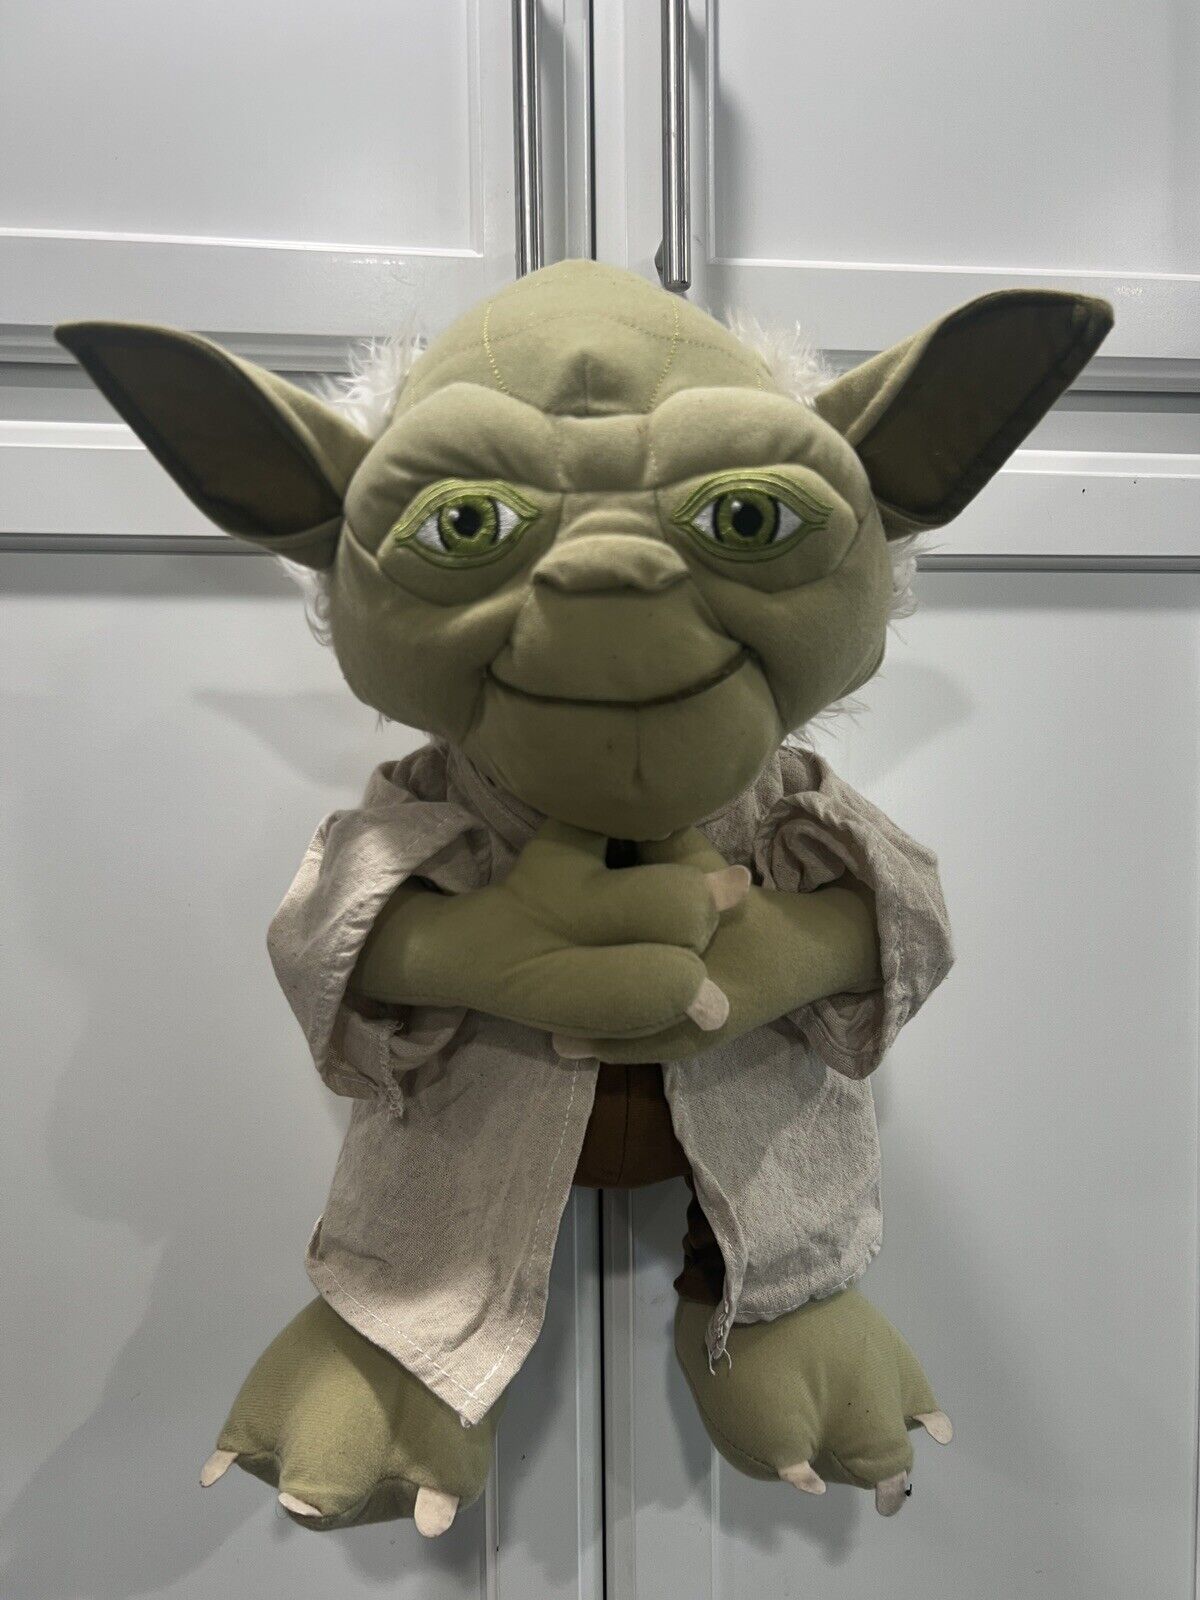 Star Wars Yoda Plush,Excellent Condition,18 inch Stuffed Toy,Life Like